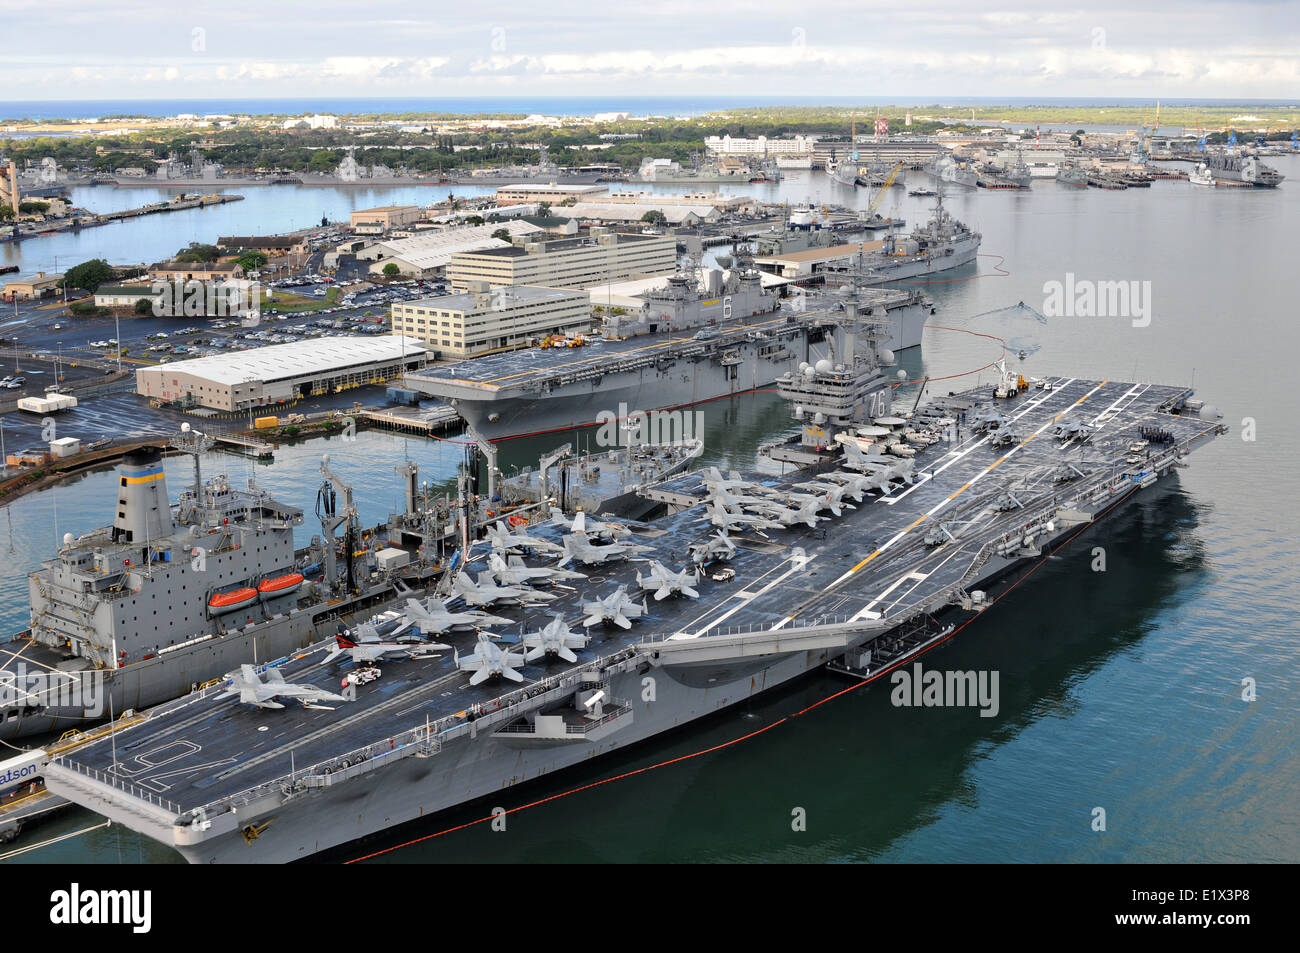 US Navy Nimitz-class aircraft carrier USS Ronald Reagan and the Wasp-class amphibious assault ship USS Bonhomme Richard sit alongside each other in Pearl Harbor while they prepare to embark for exercises in conjunction with Rim of the Pacific July 06, 2010 in Honolulu, Hawaii. Stock Photo